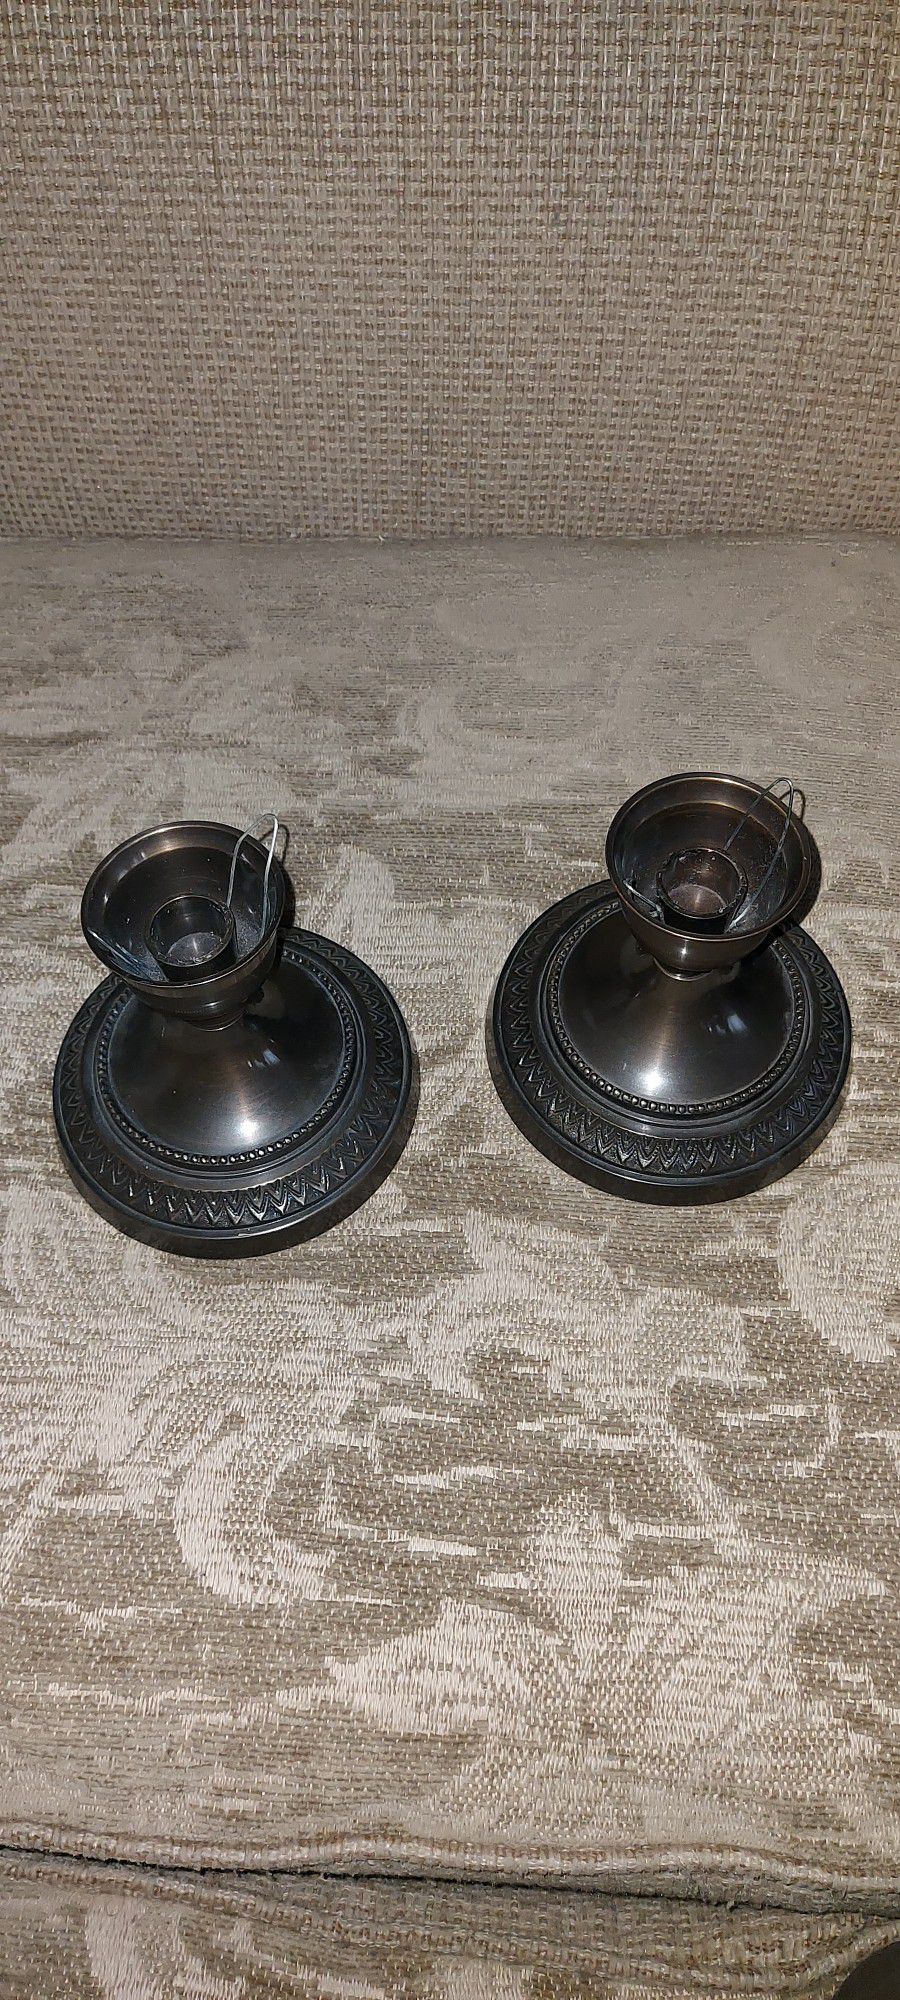 A Pair Of Sterling Silver Candle Holder, Very Nice